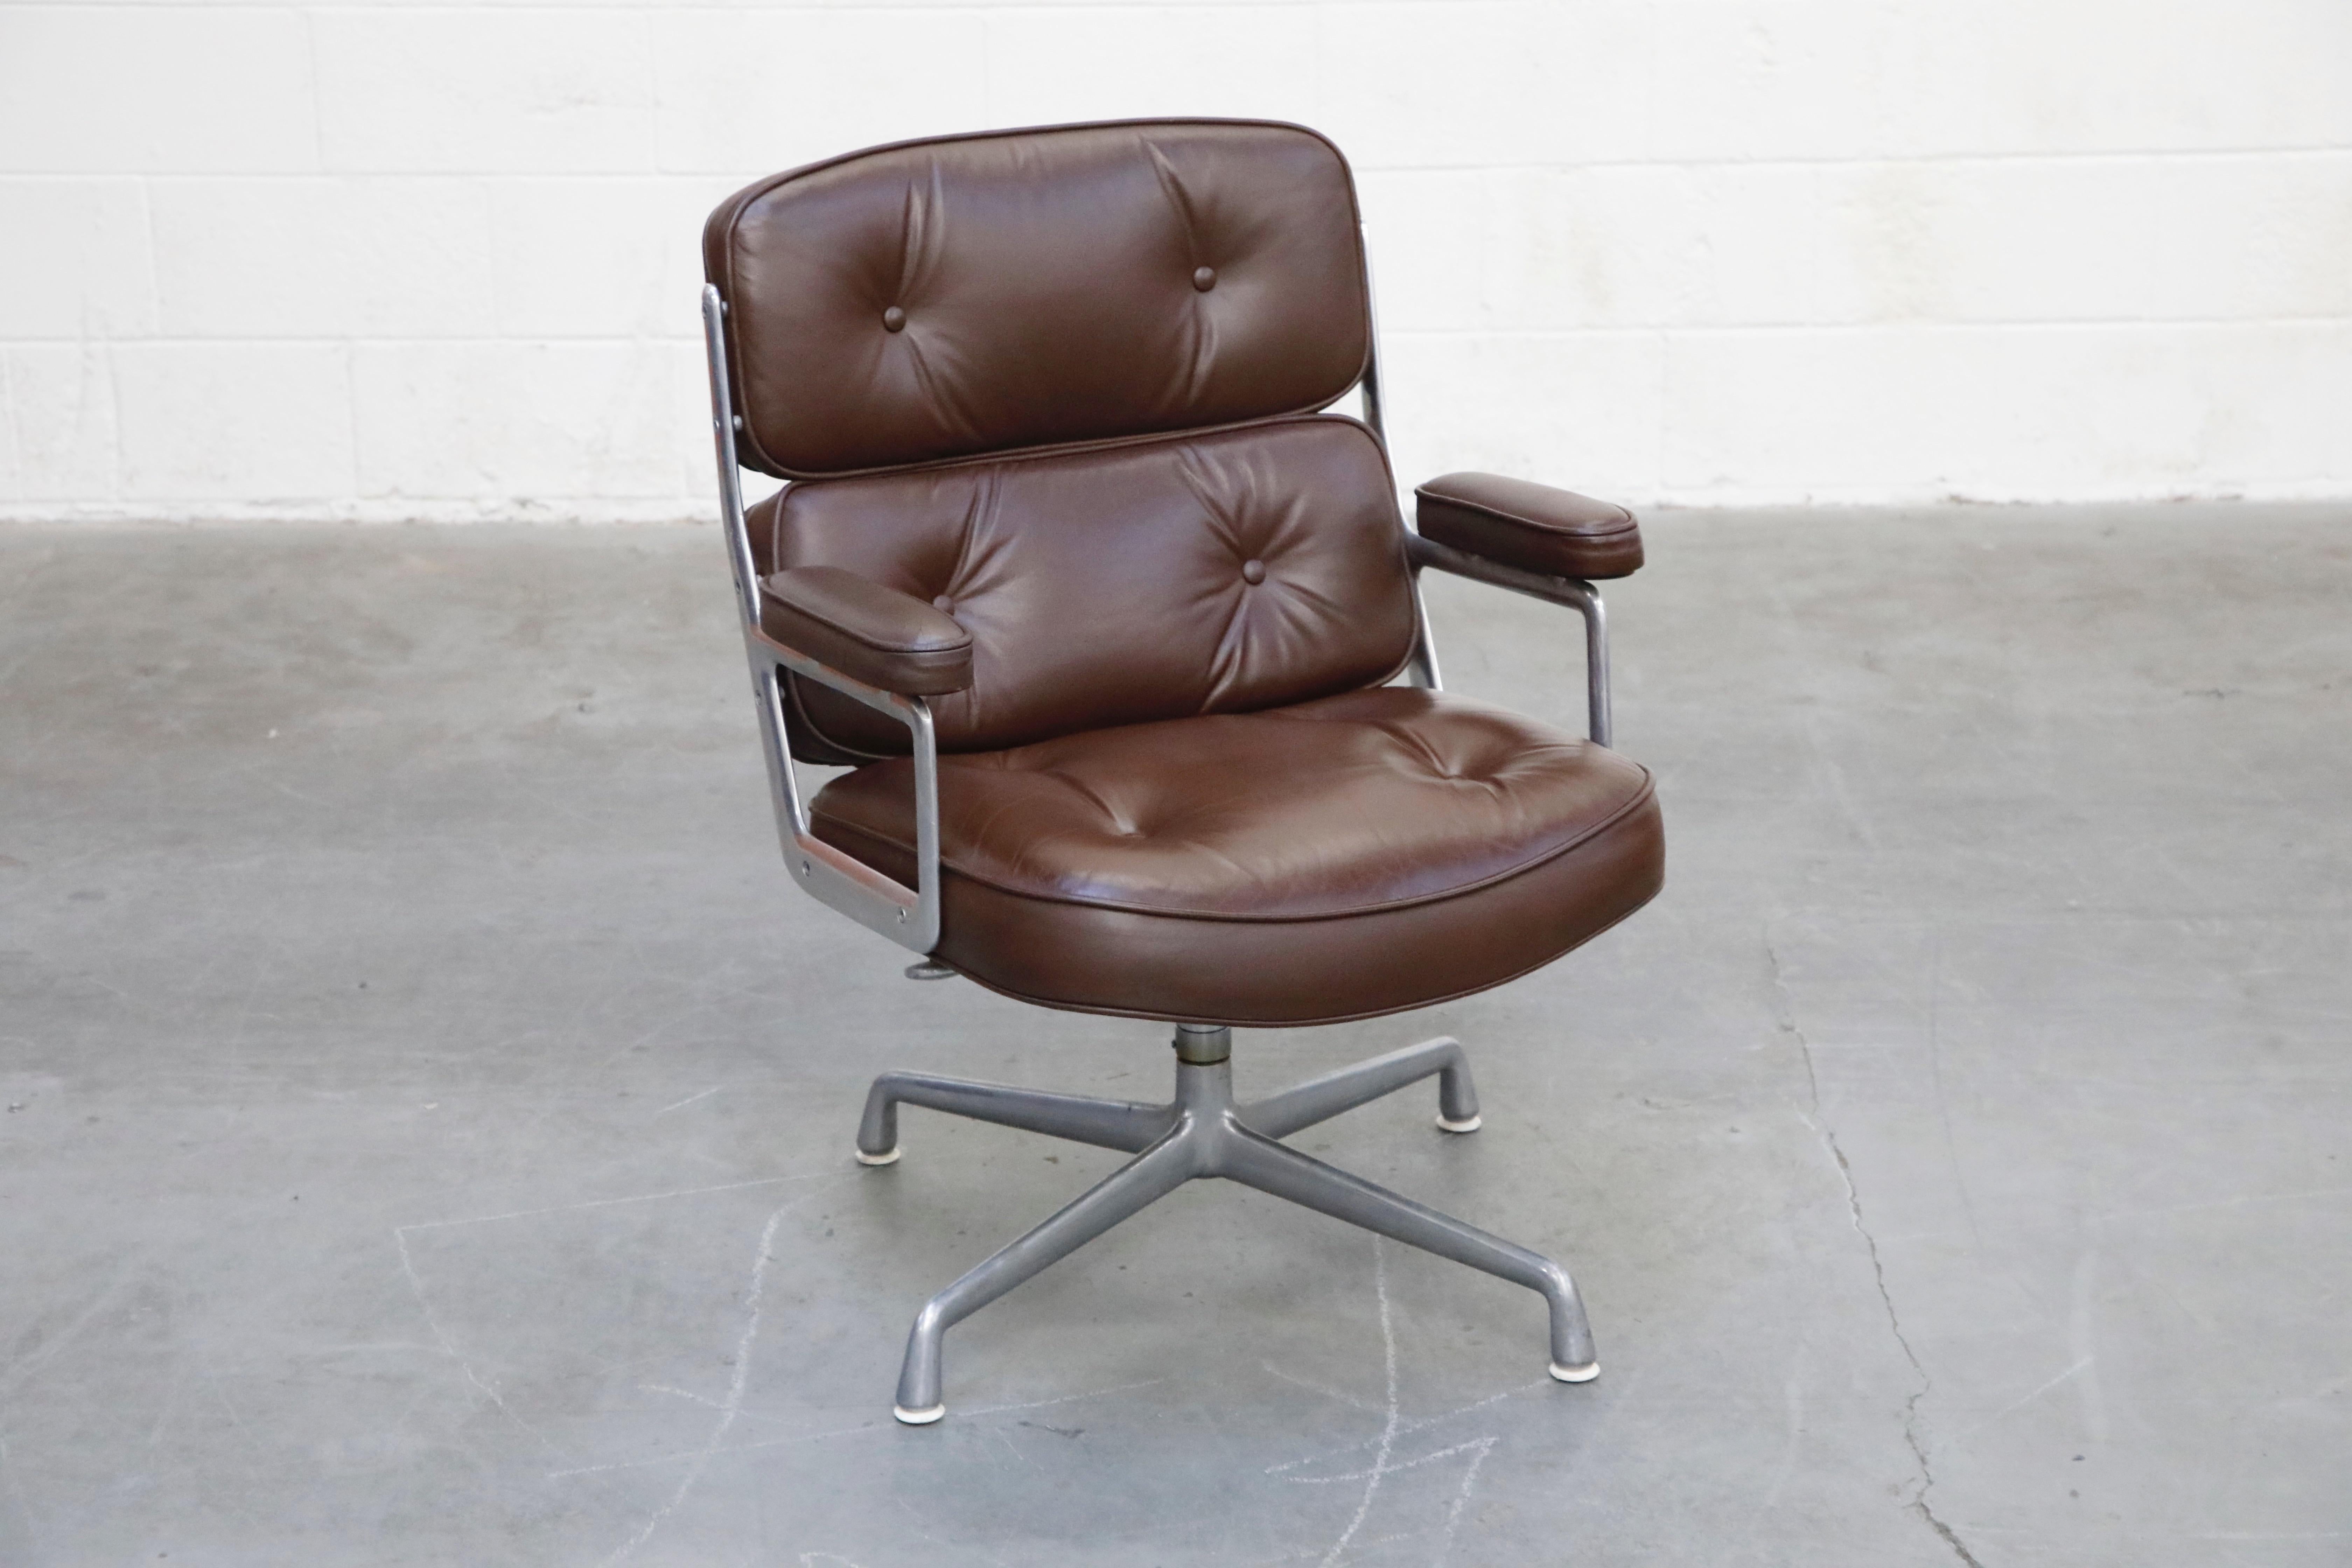 American Pair of Time Life Lounge Chairs by Charles Eames for Herman Miller, 1977, Signed